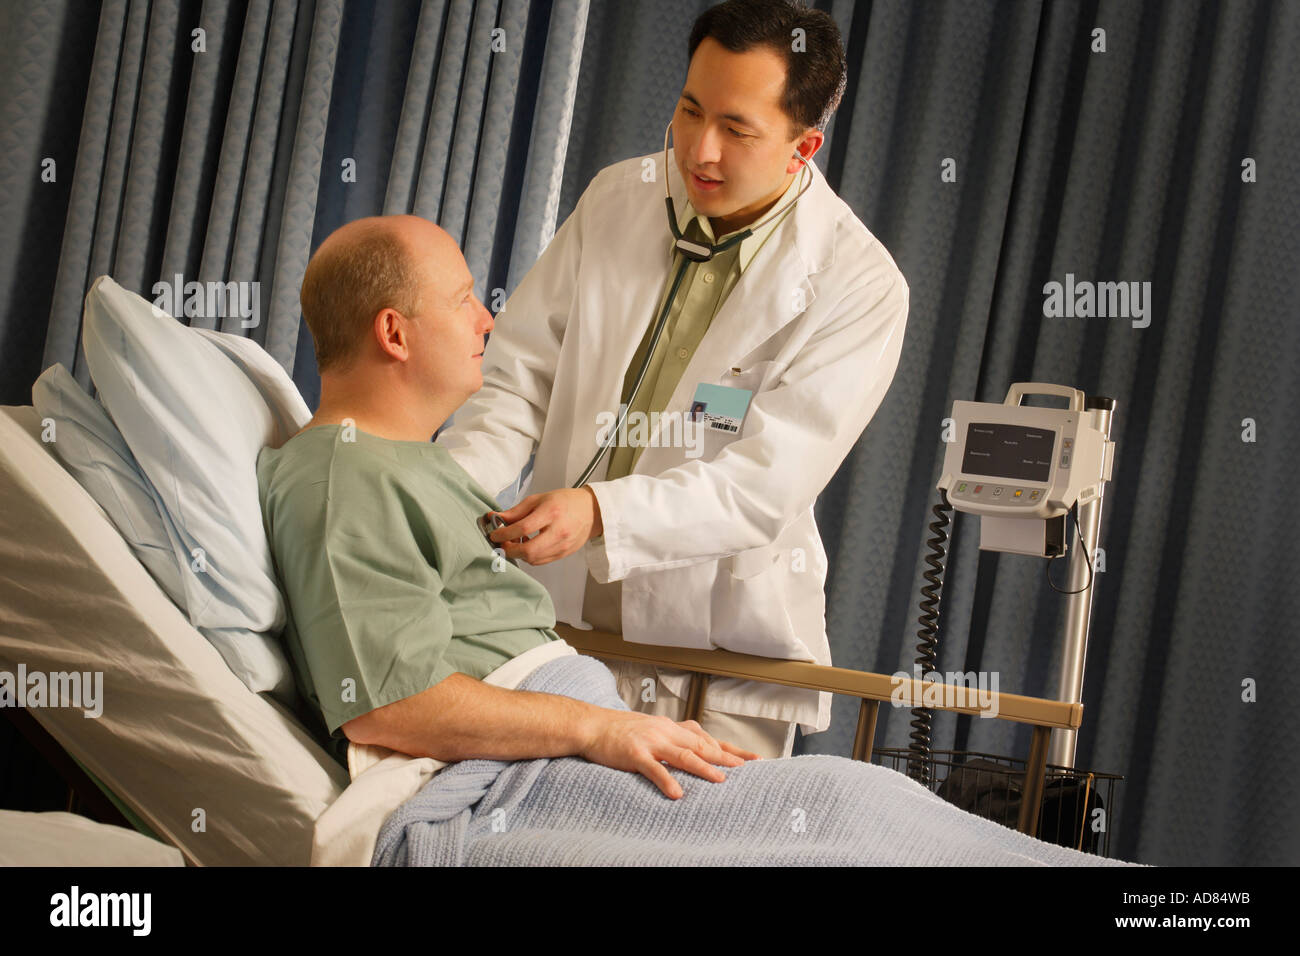 Doctor checking patient with a stethoscope Stock Photo